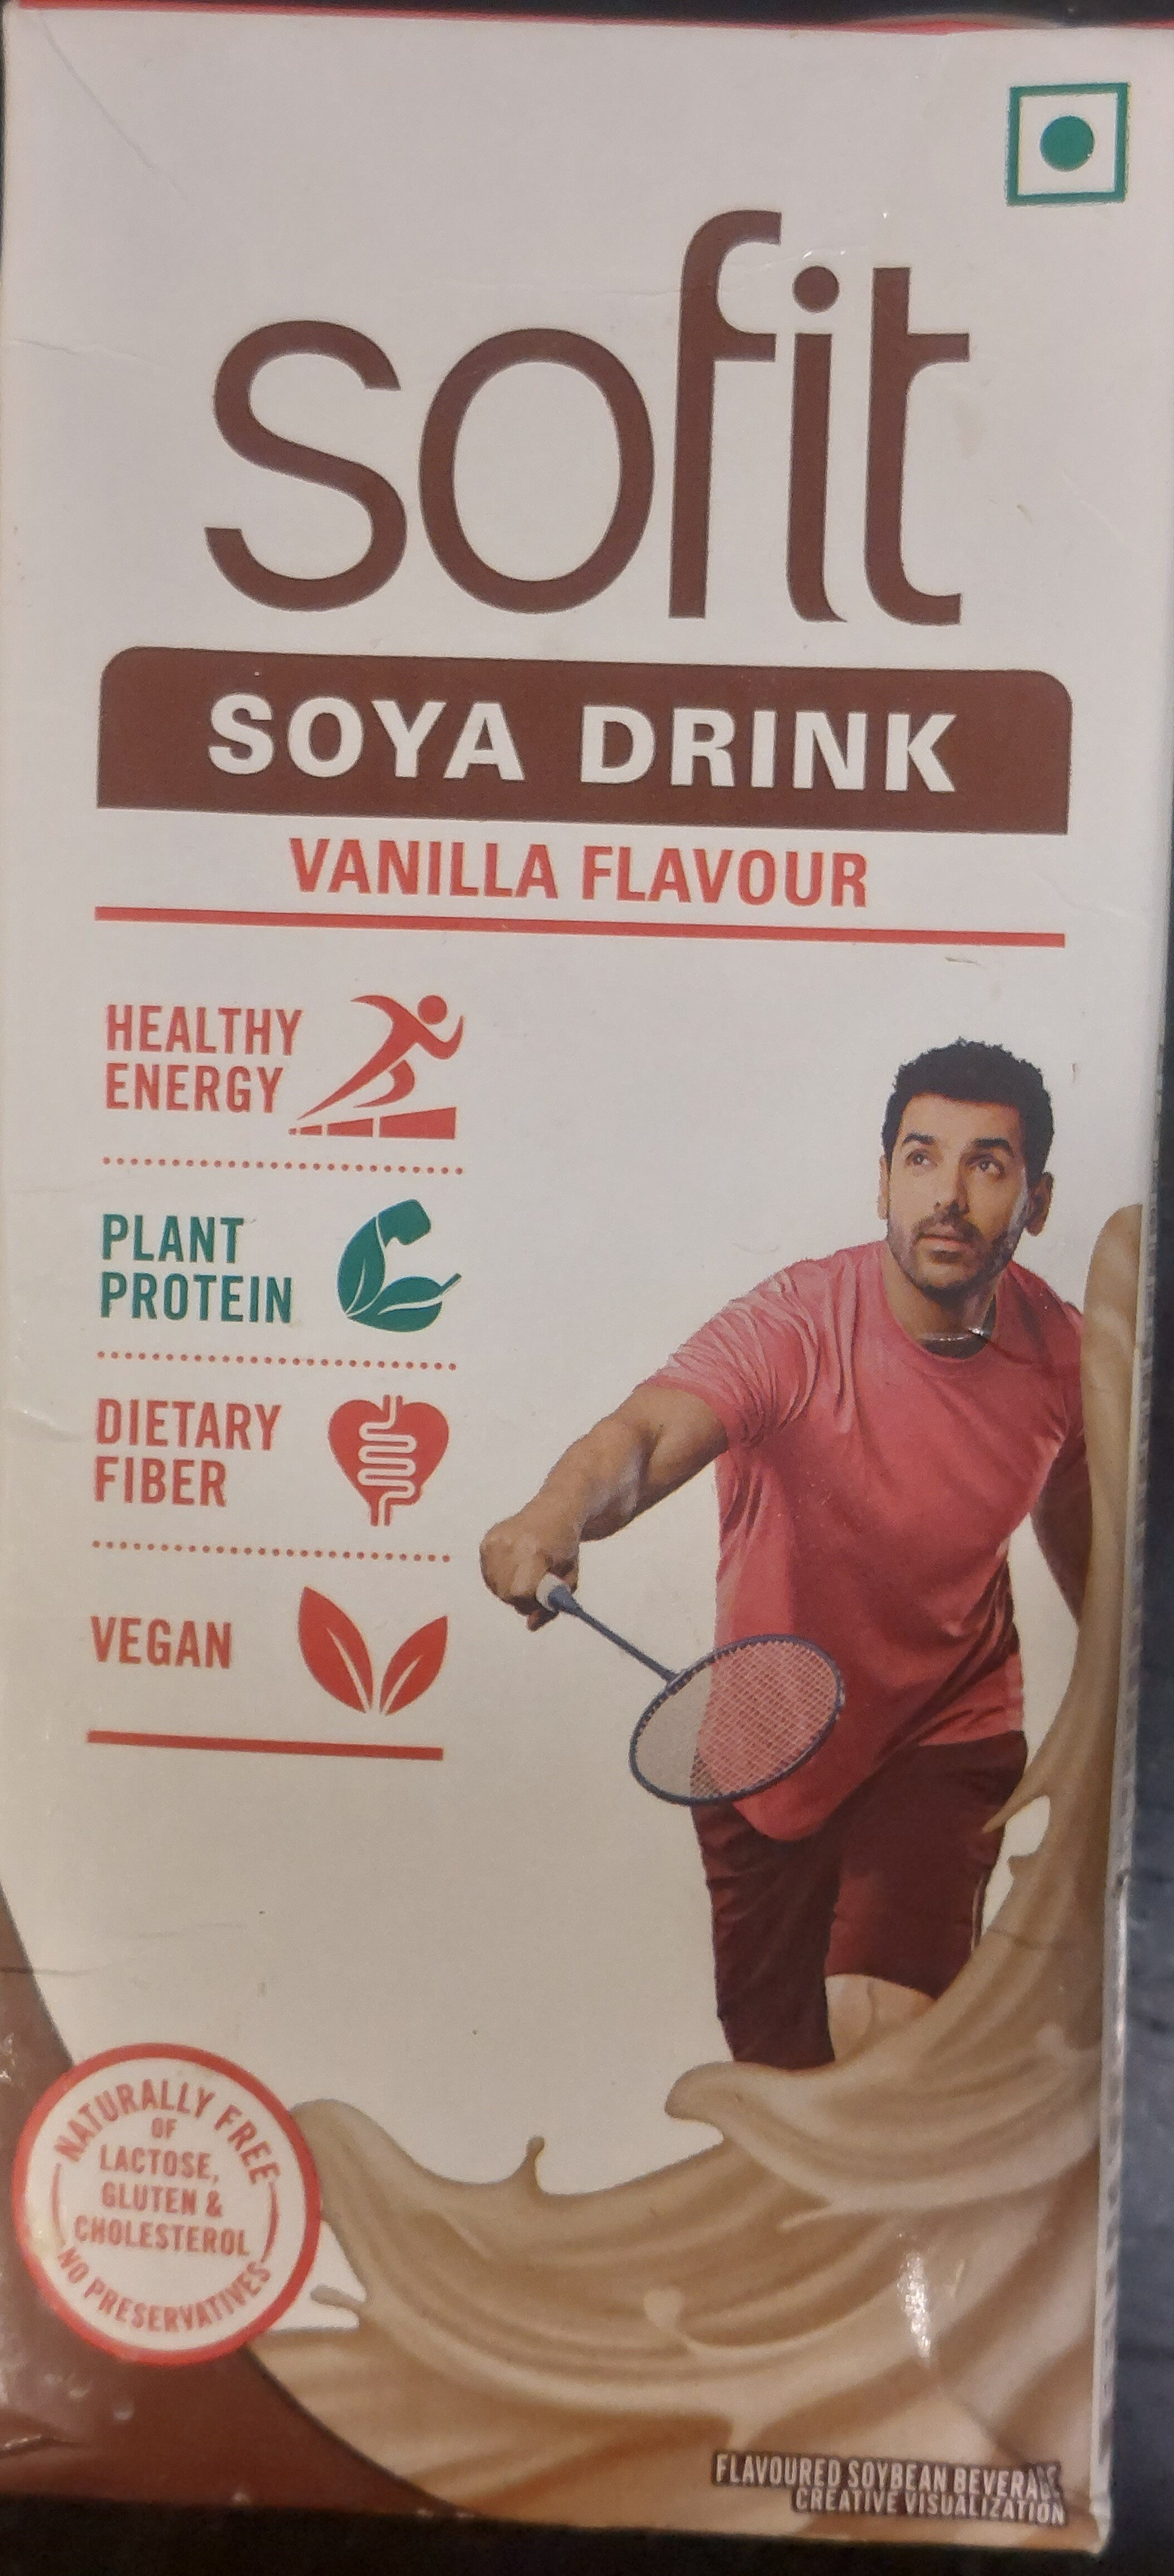 Sofit Soya Drink Vanilla Flavour - Product